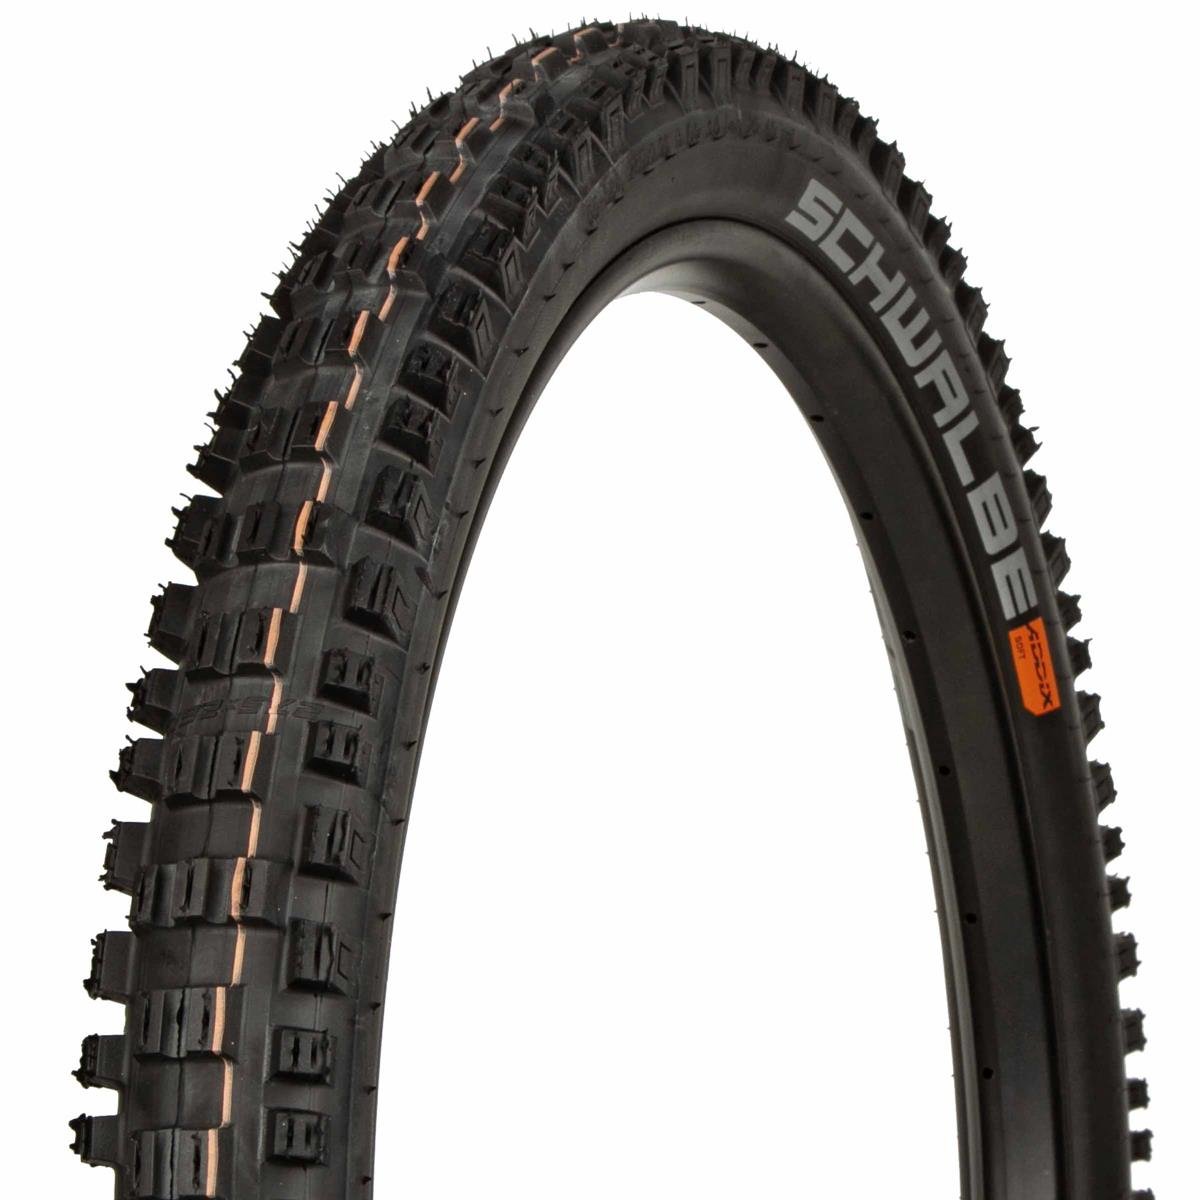 Schwalbe MTB Tire Eddy Current Front HS 496 Black, 27.5 x 2.6 Inches, Evo, Super Trail, SnakeSkin, Tubeless Easy, Addix Soft, Foldable